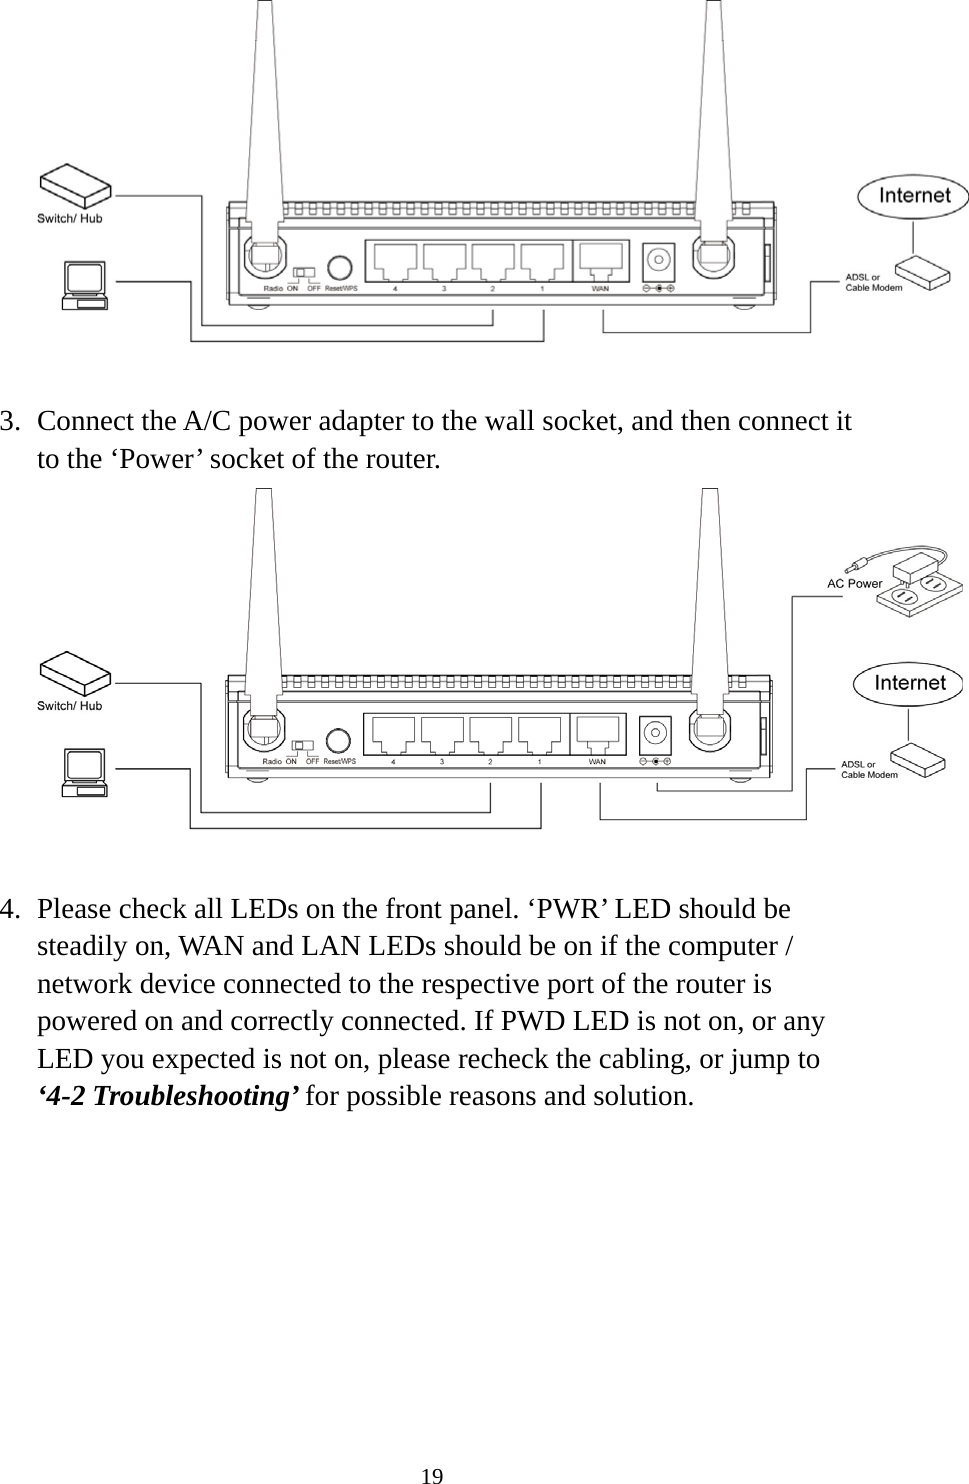 19   3. Connect the A/C power adapter to the wall socket, and then connect it to the ‘Power’ socket of the router.   4. Please check all LEDs on the front panel. ‘PWR’ LED should be steadily on, WAN and LAN LEDs should be on if the computer / network device connected to the respective port of the router is powered on and correctly connected. If PWD LED is not on, or any LED you expected is not on, please recheck the cabling, or jump to ‘4-2 Troubleshooting’ for possible reasons and solution. 